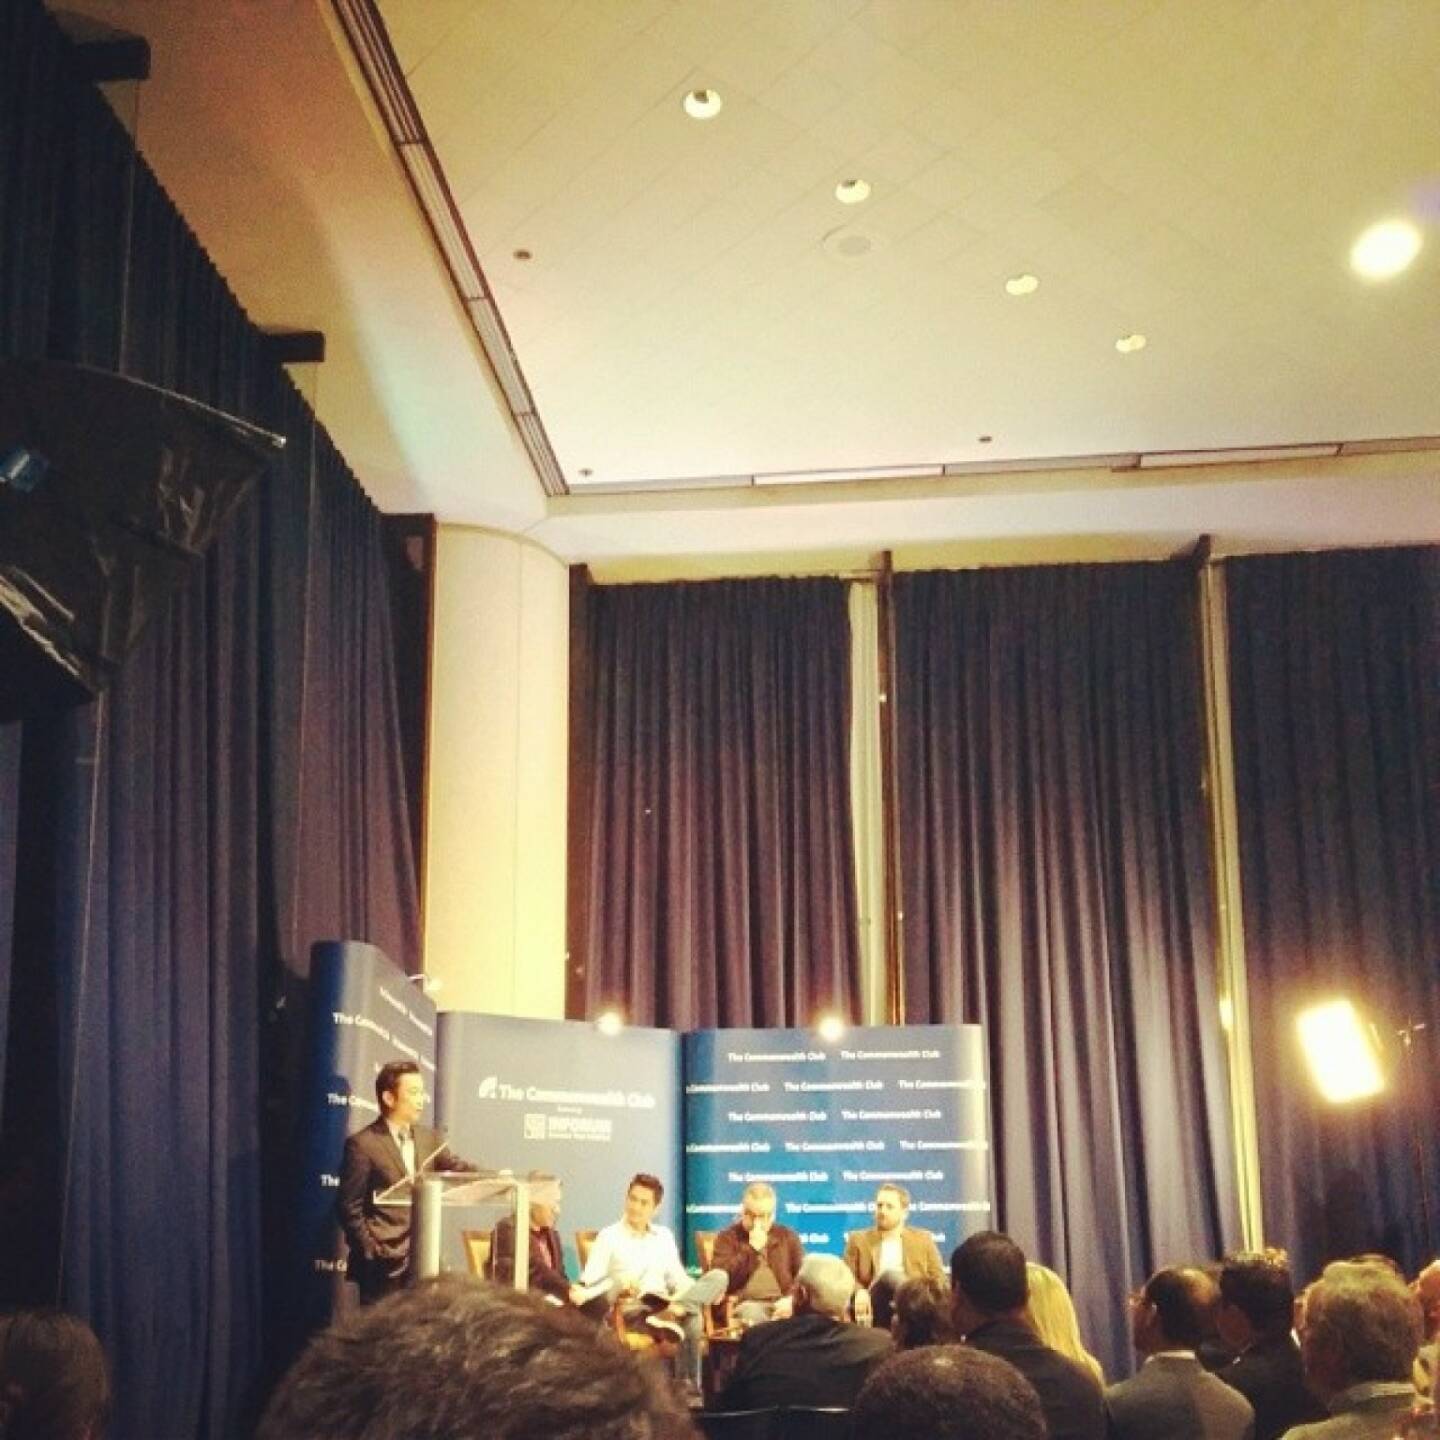 At tonight's Commonwealth Club panel with peeps of Zappos, Okcupid and Adobe about innovation labs #thinklikeastartup — hier: The Commonwealth Club of California.